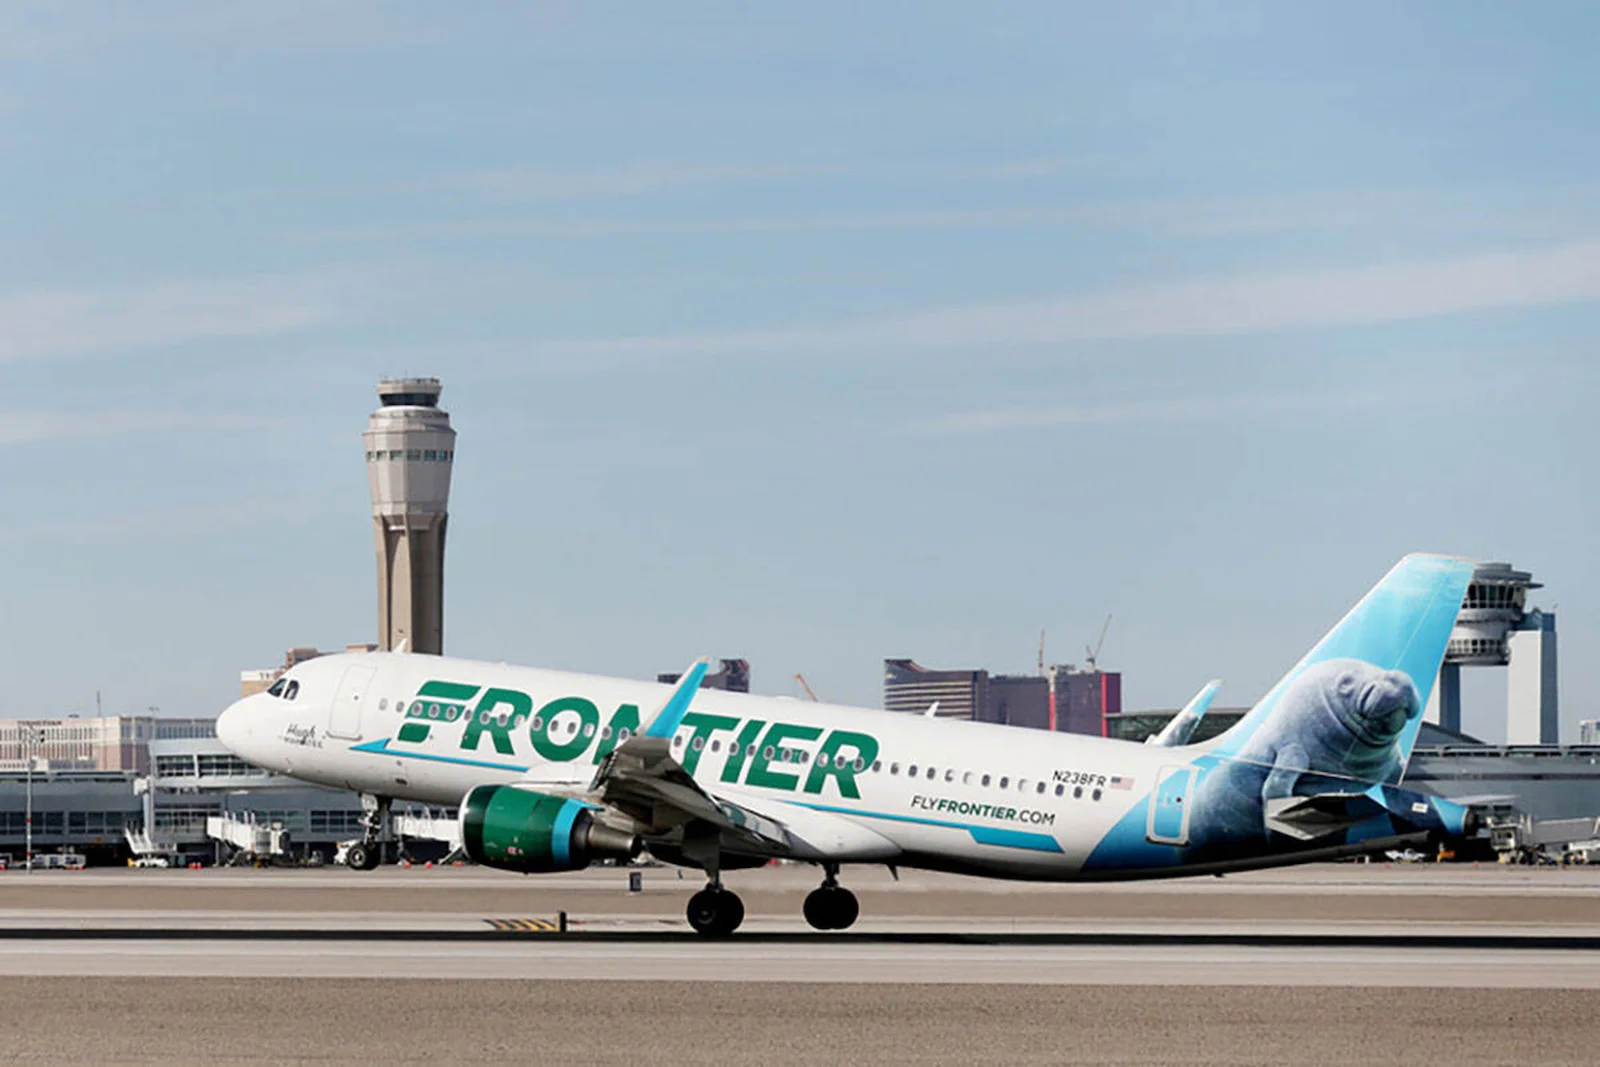 Does Frontier's online chat function when it stops making calls to customer service?